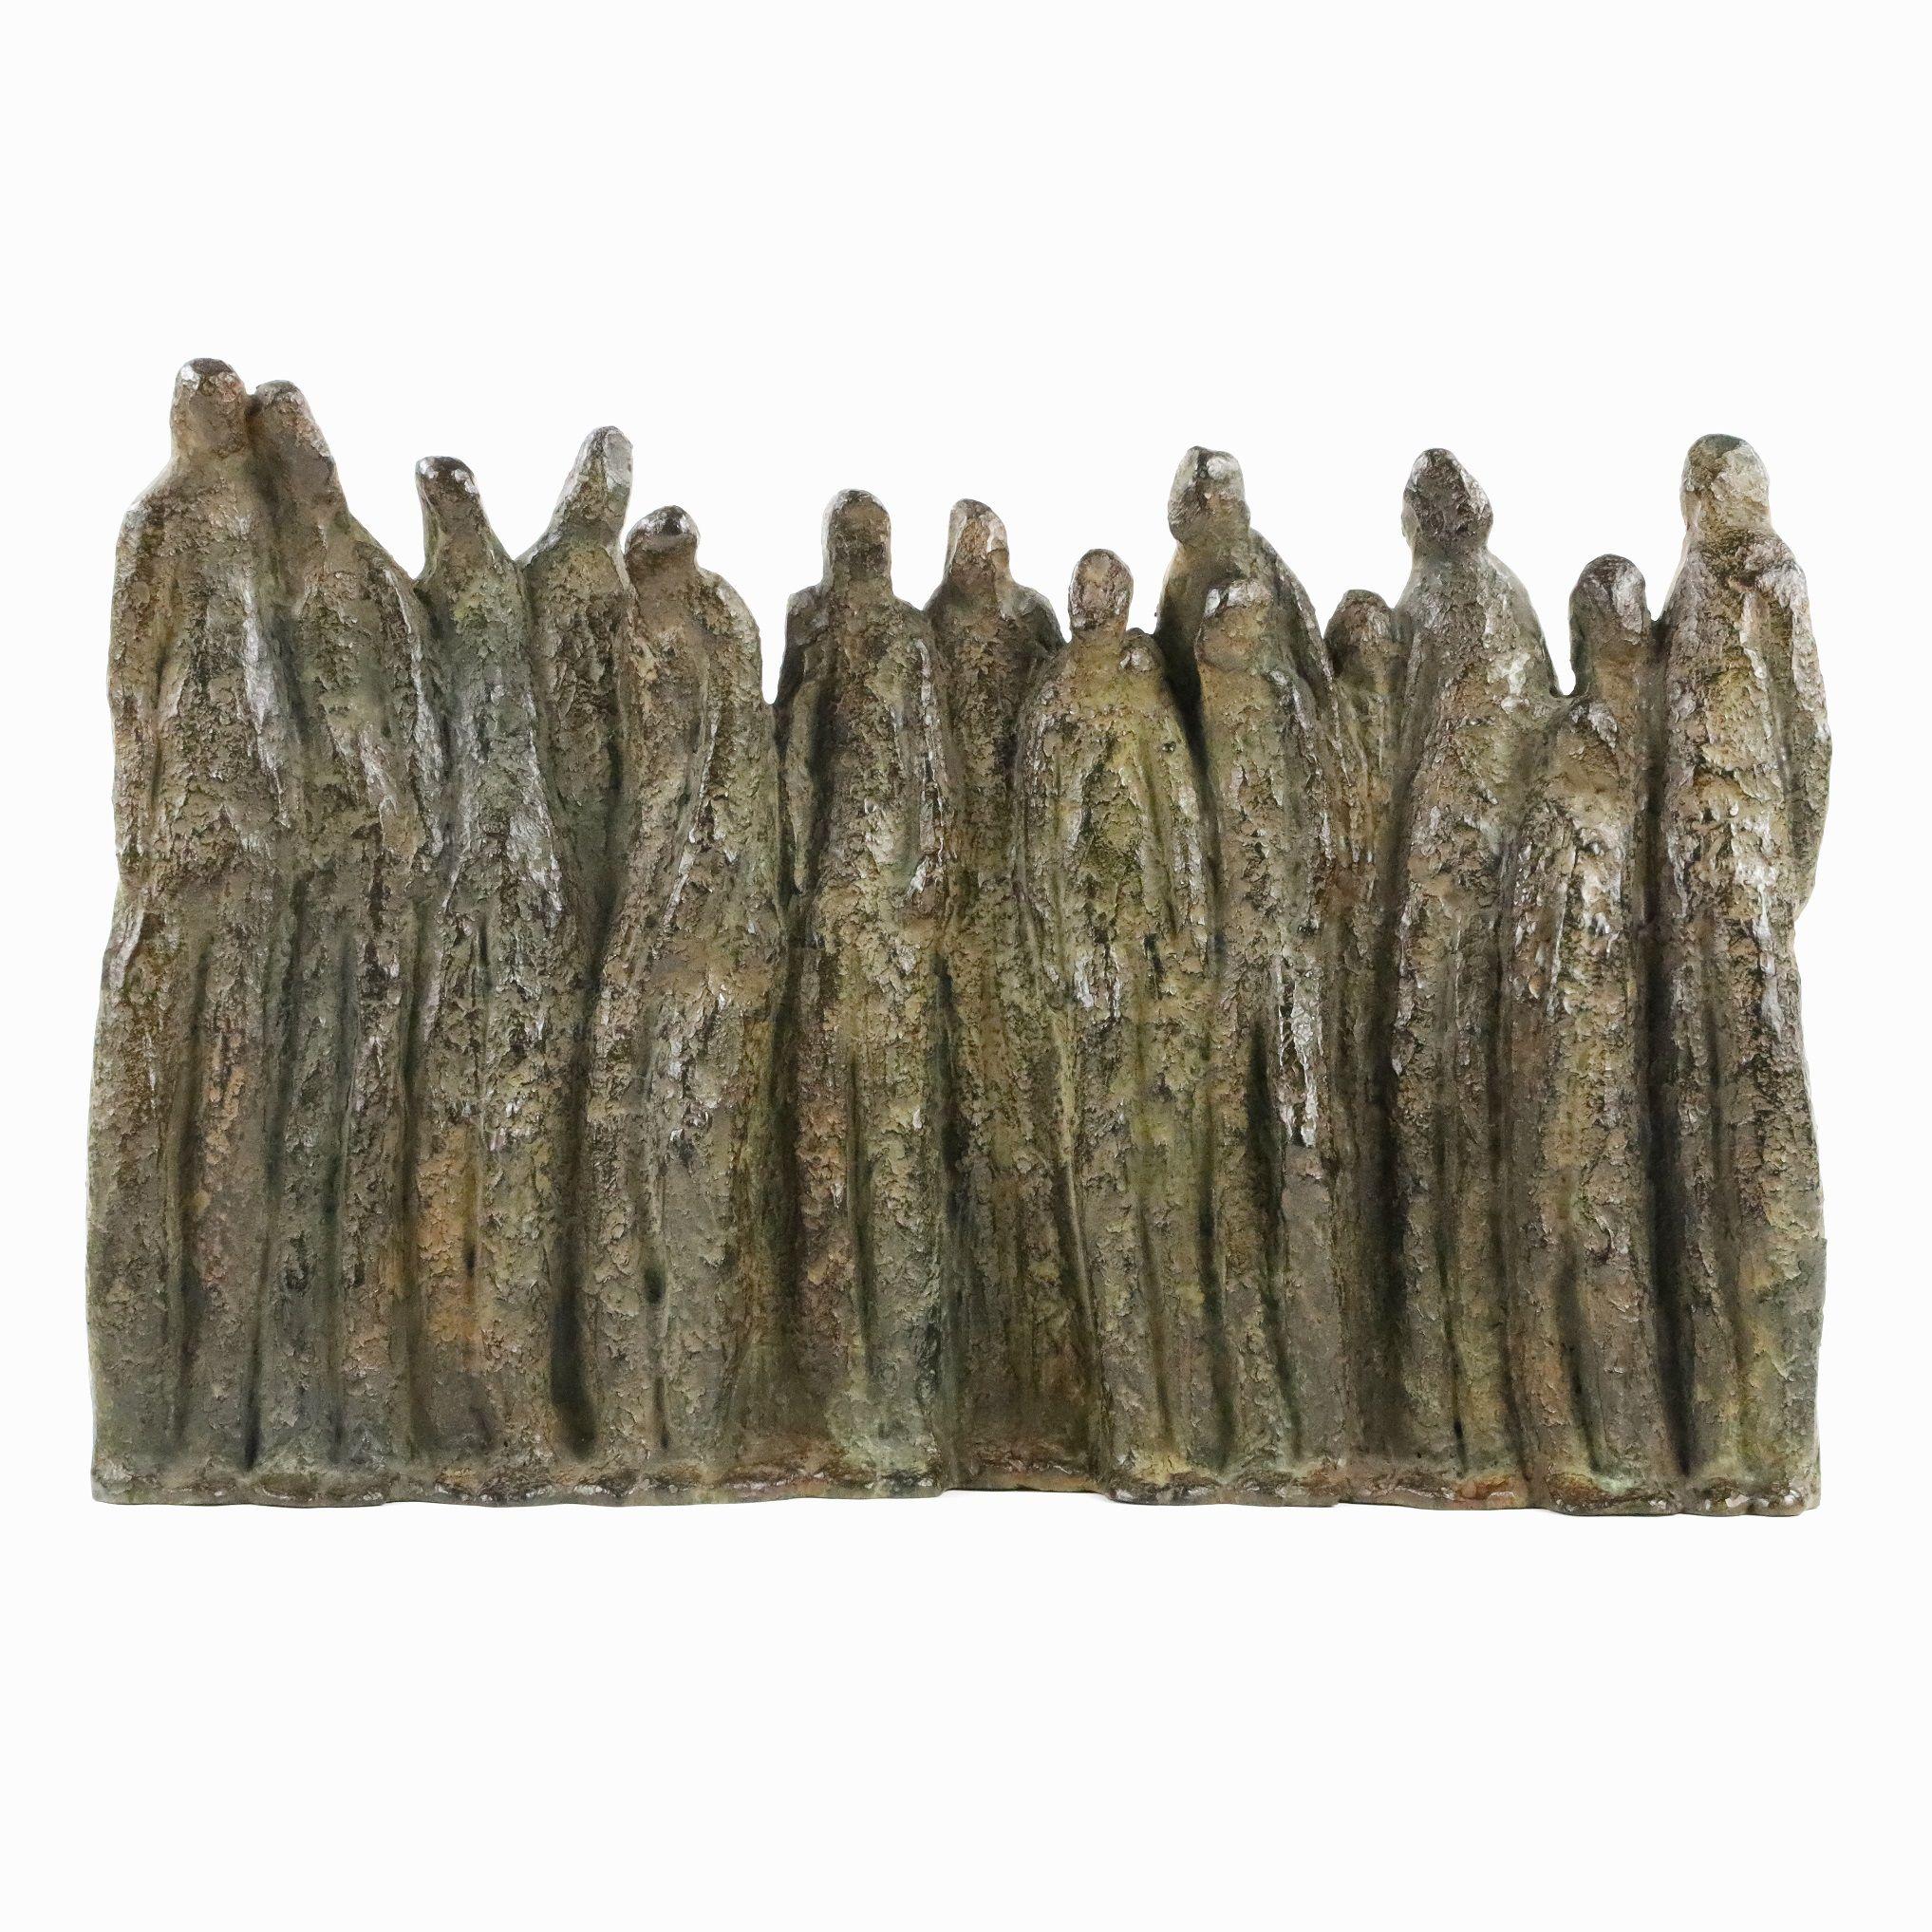 Group II is a bronze sculpture by contemporary artist Delphine Brabant, dimensions are 17 × 26 × 6 cm (6.7 × 10.2 × 2.4 in). 
The sculpture is signed and numbered, it is part of a limited edition of 8 editions and comes with a certificate of